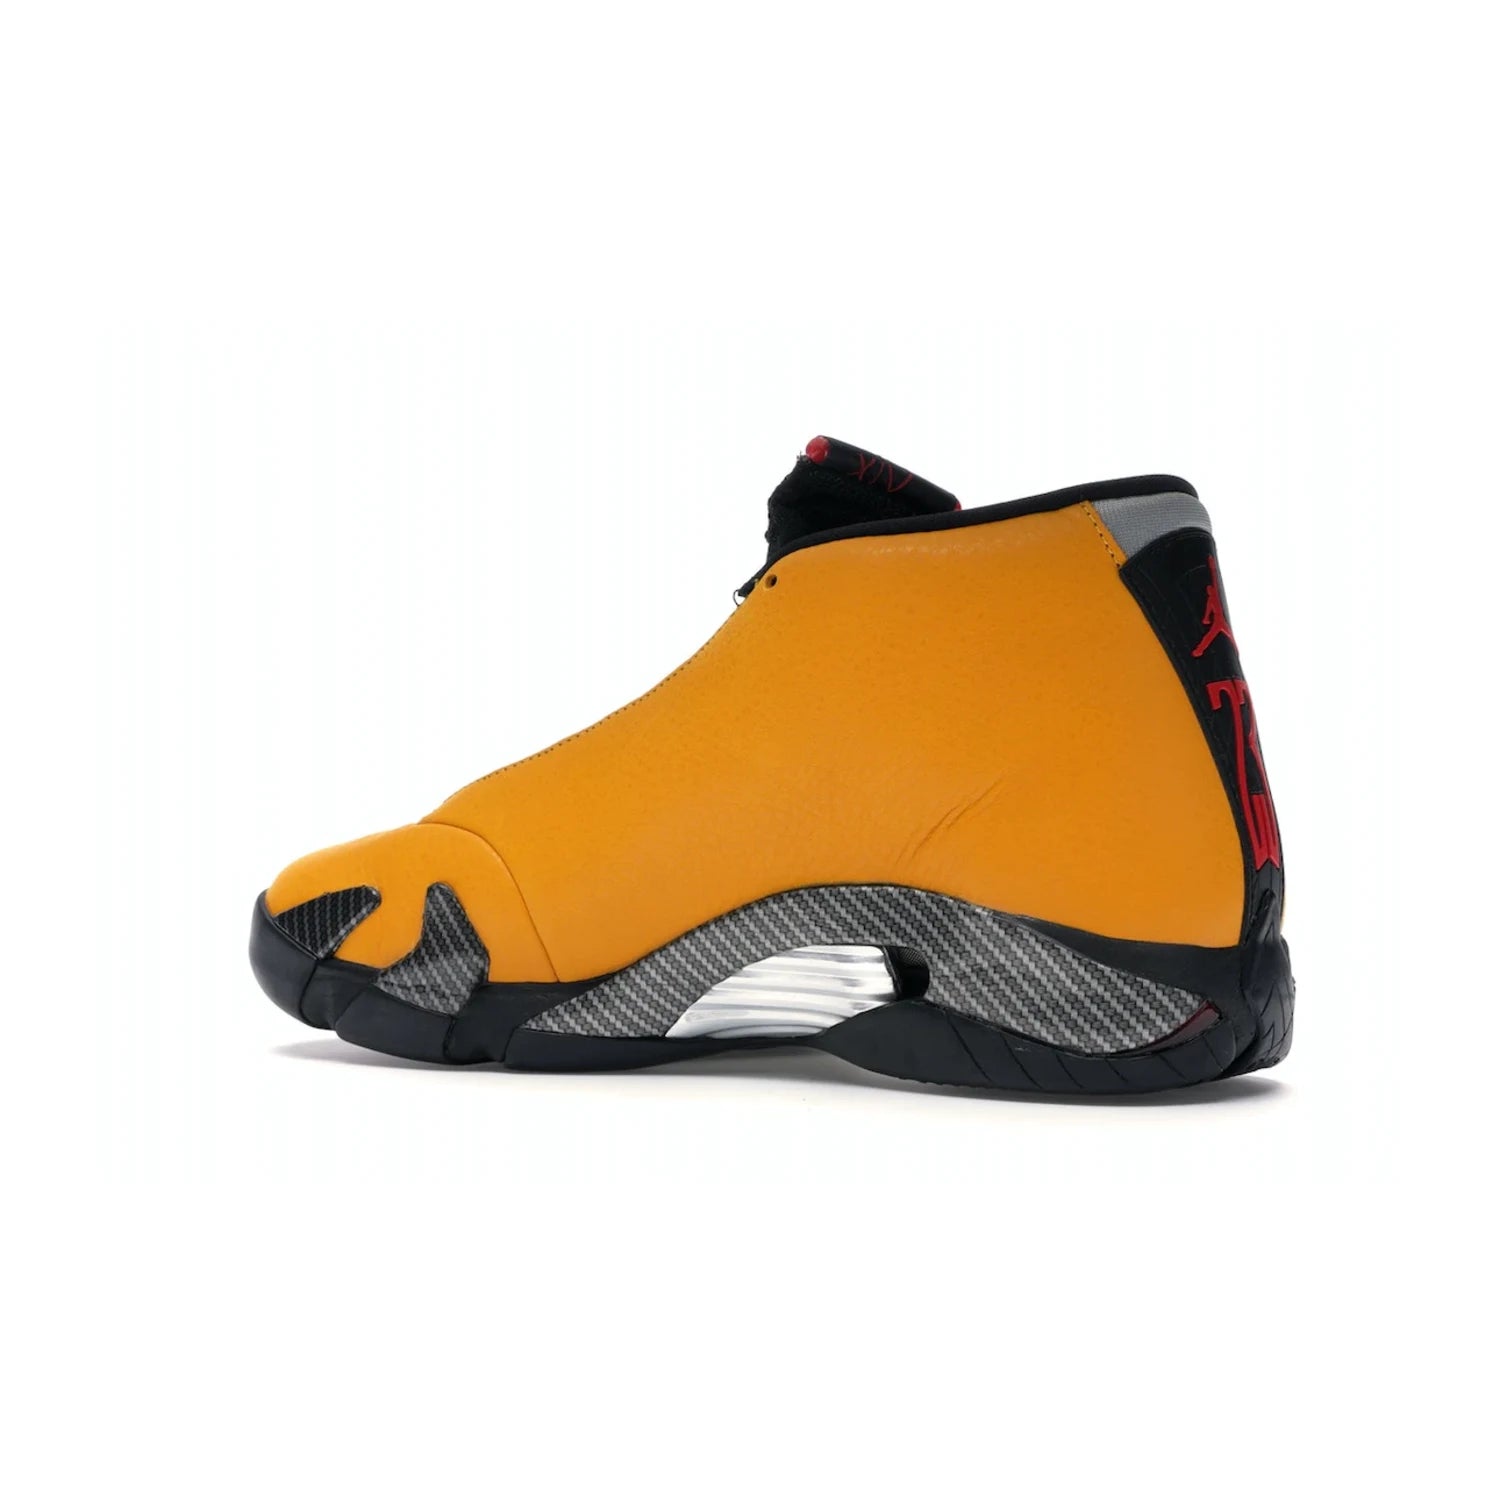 Jordan 14 Retro University Gold - Image 22 - Only at www.BallersClubKickz.com - Air Jordan 14 Retro University Gold: High-quality leather sneaker with Jumpman, tongue & heel logos. Zoom Air units & herringbone traction for superior comfort. University Gold outsole for stylish streetwear.